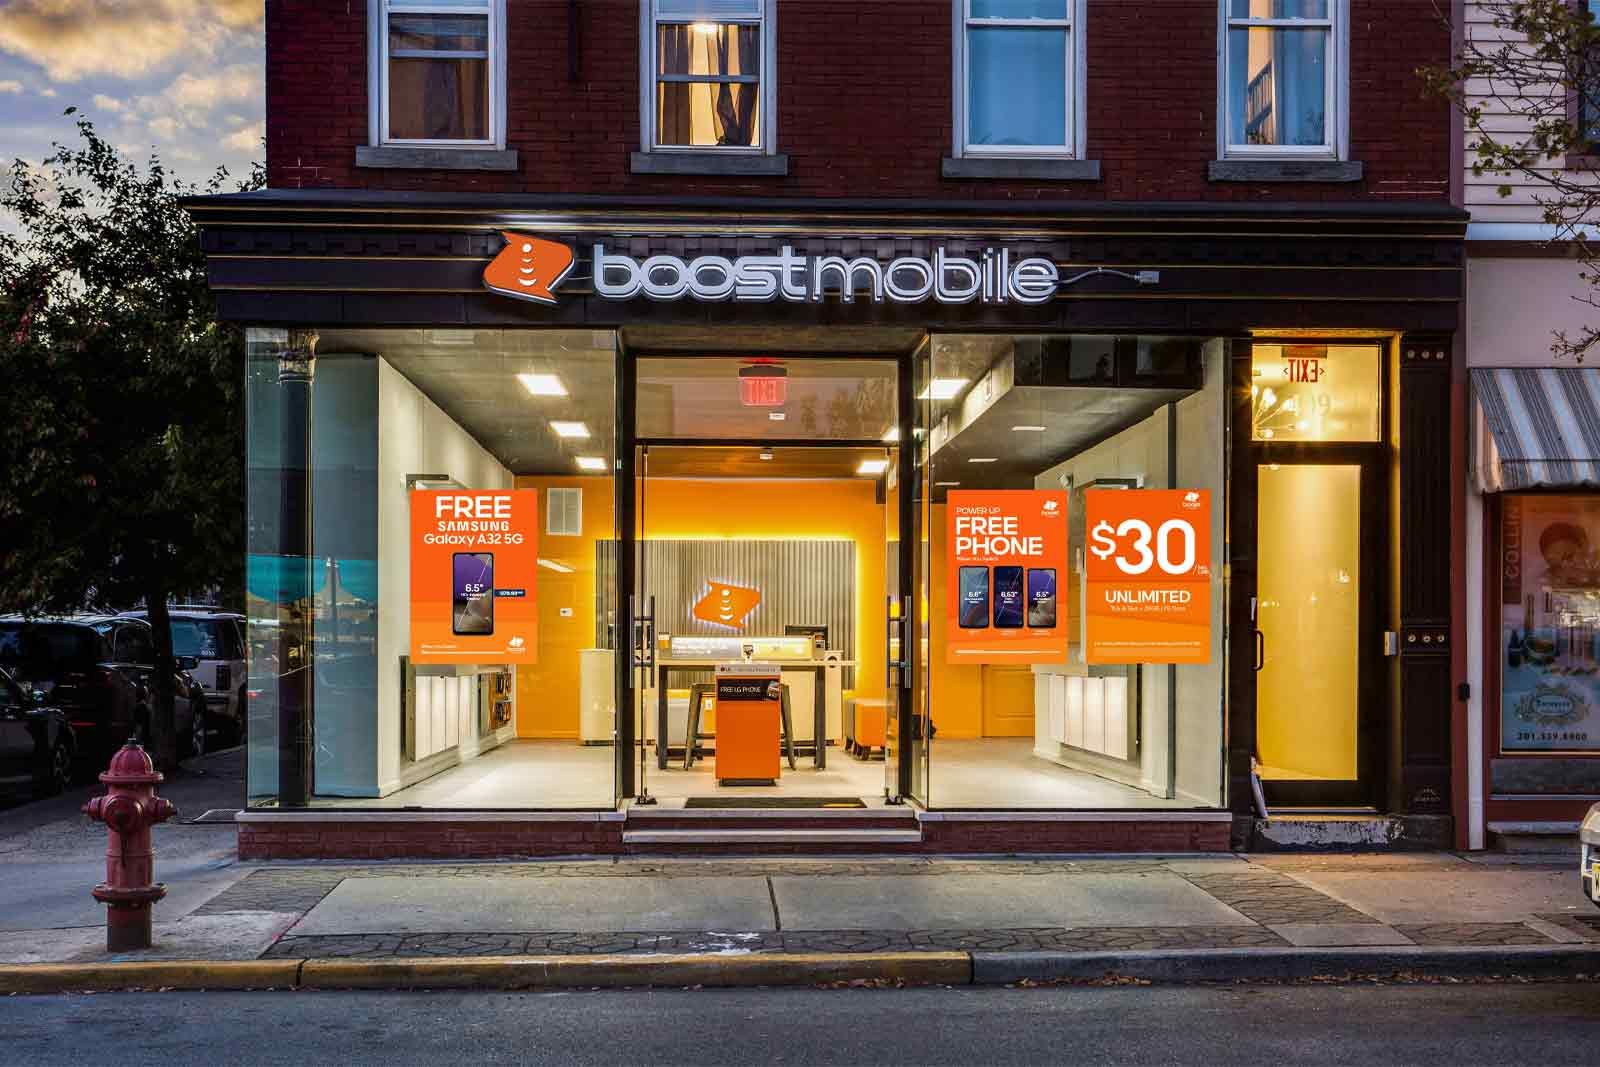 Boost Mobile has an unbelievable unlimited Data, Talk, and Text deal